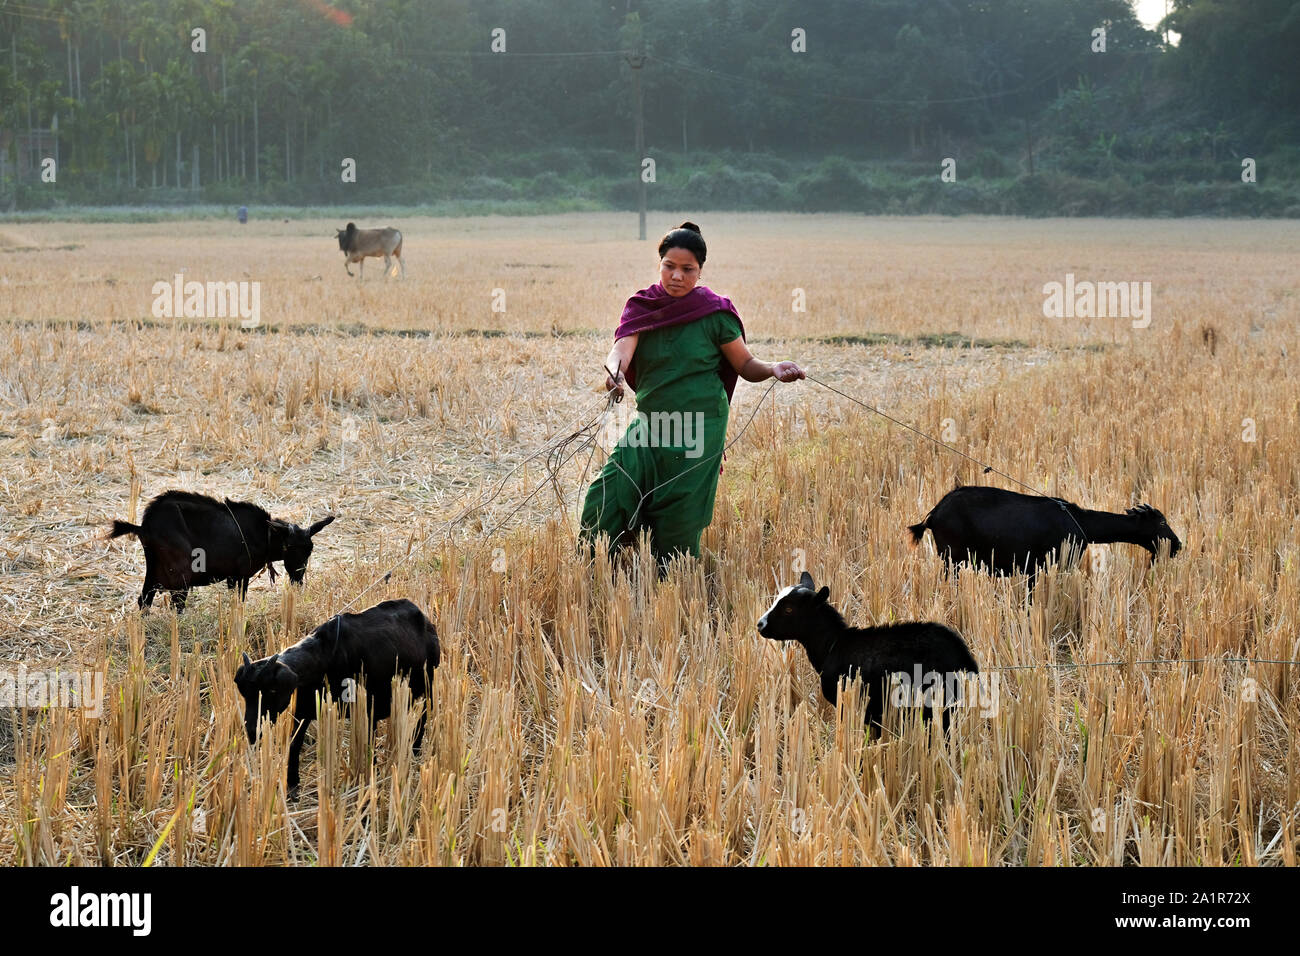 Woman raising her goats on a harvested paddy field in the village of Borakathal, Tripura State, Northeast India Stock Photo